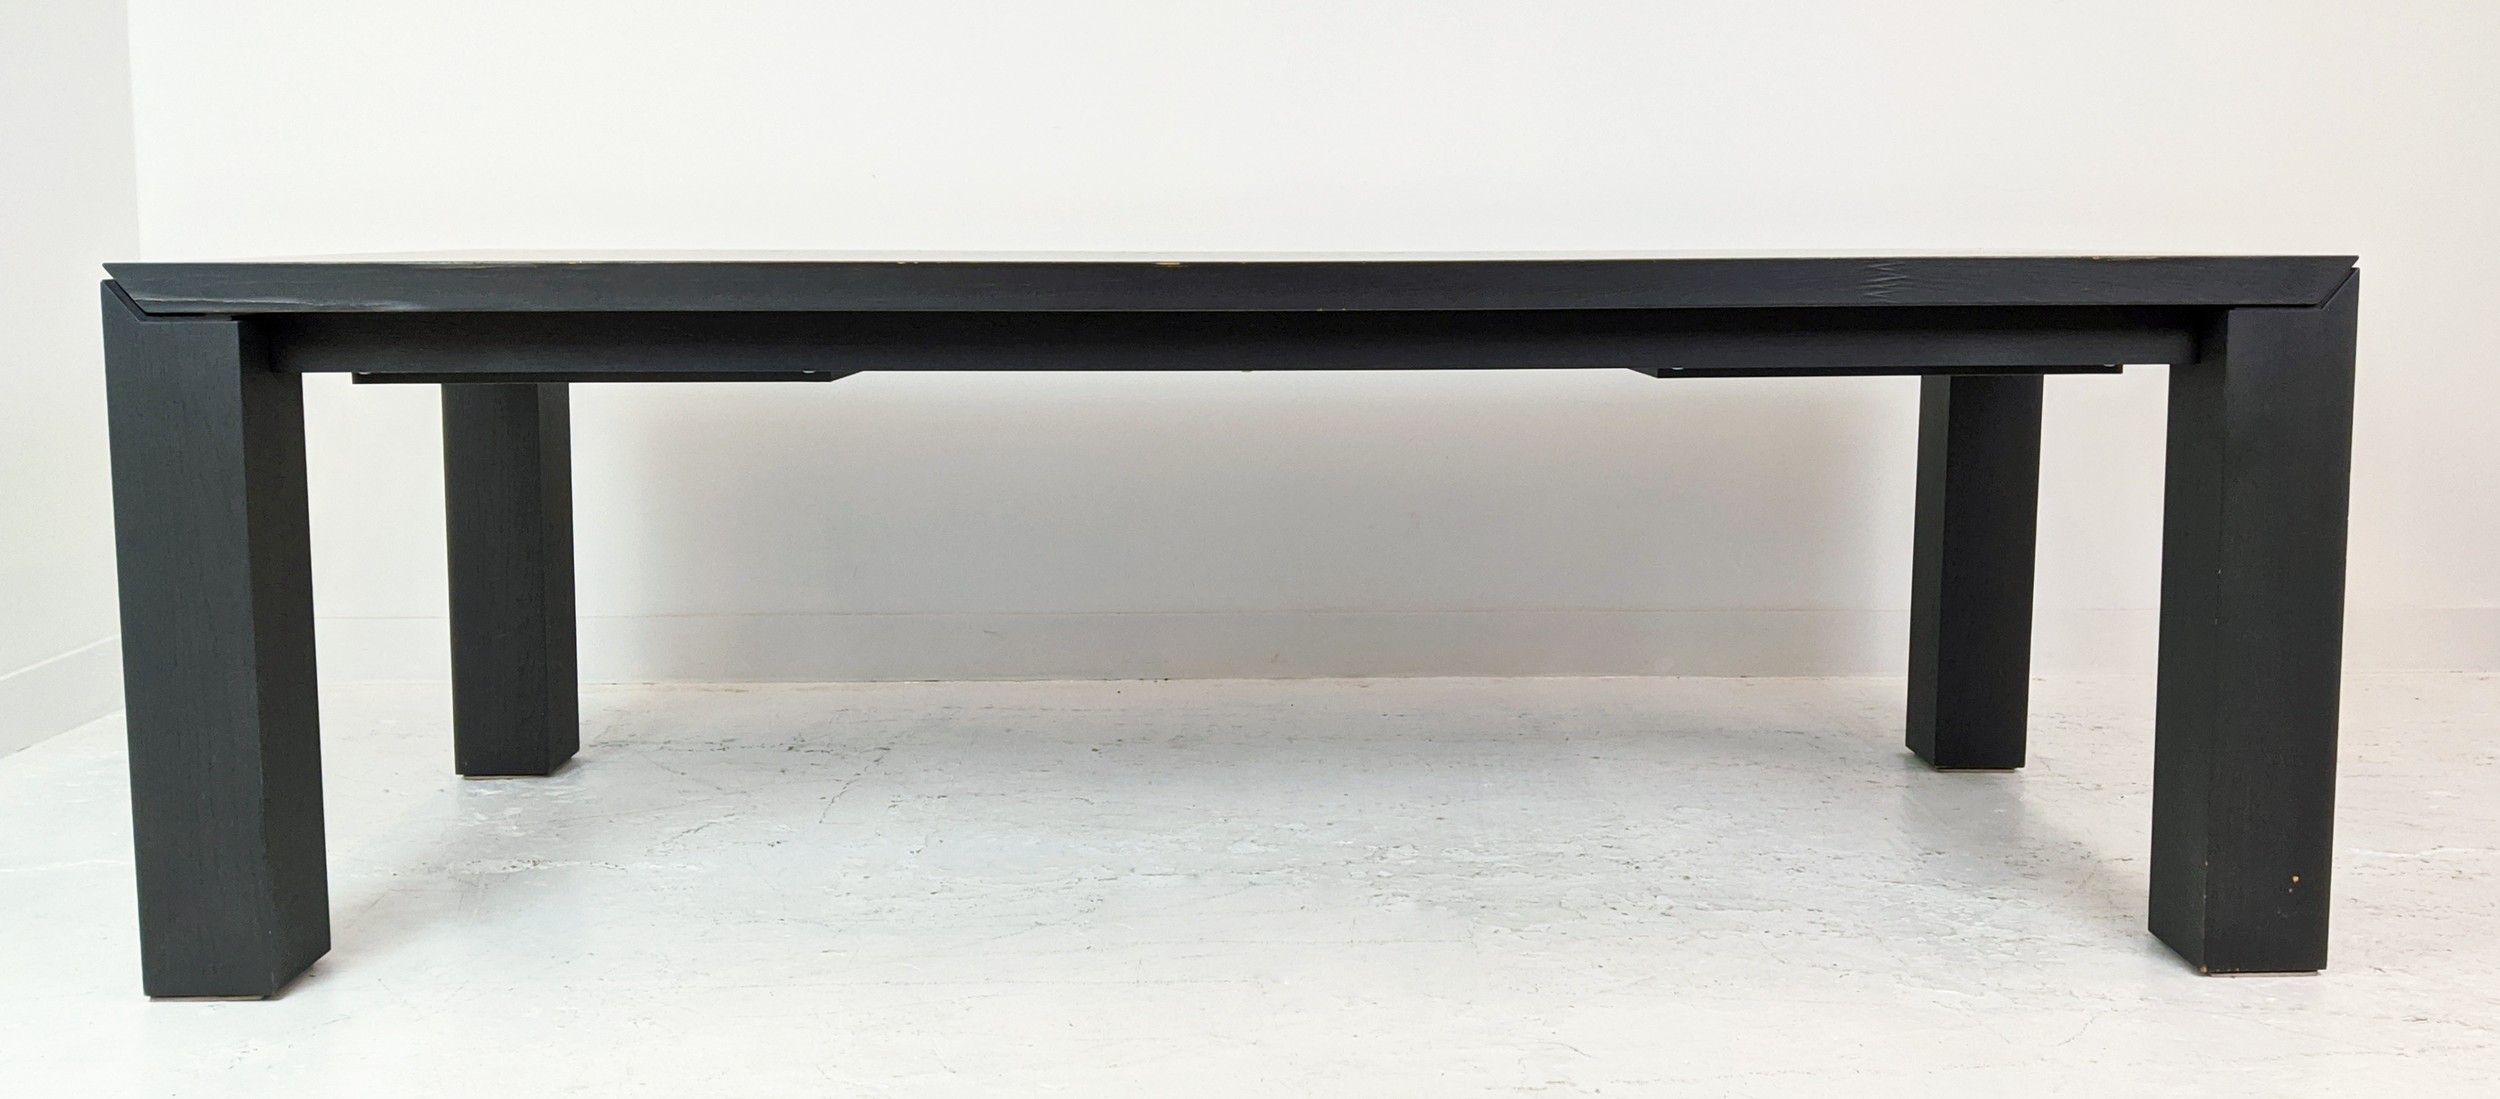 LIVING SPACE AMBROGIO EXTENDABLE DINING TABLE, 220cm x 95xm 76cm at smallest. - Image 3 of 11